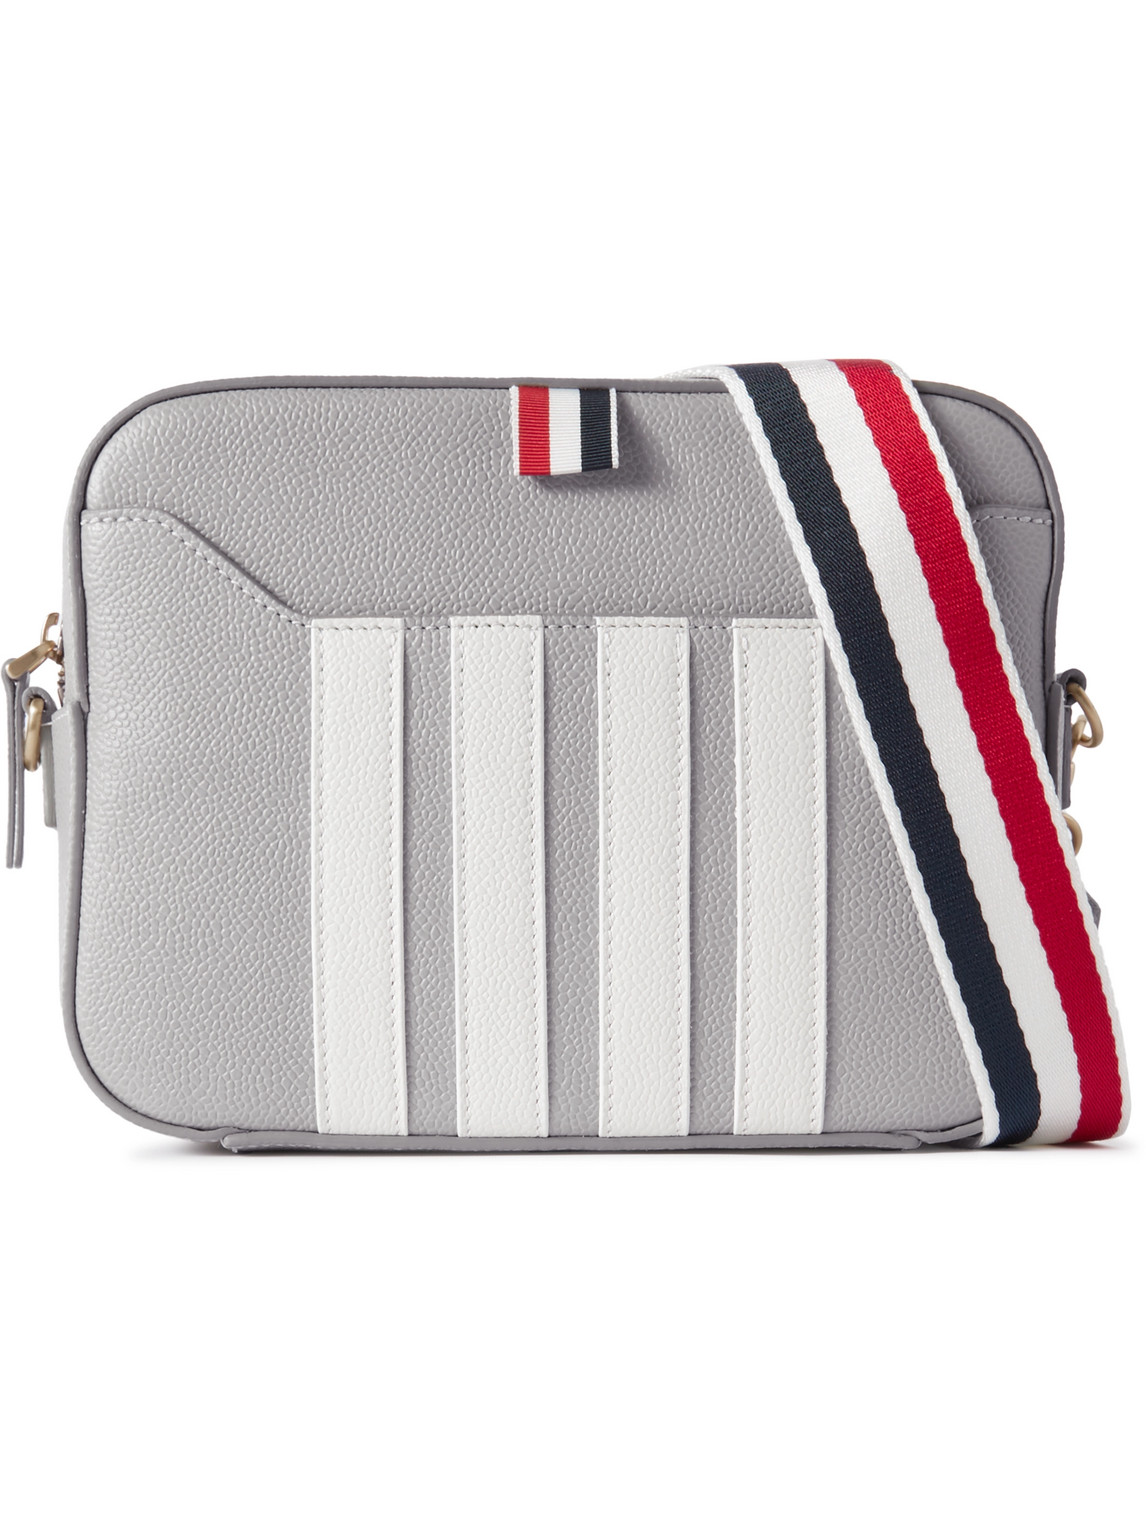 Thom Browne Small Striped Pebble-grain Leather Messenger Bag In Gray